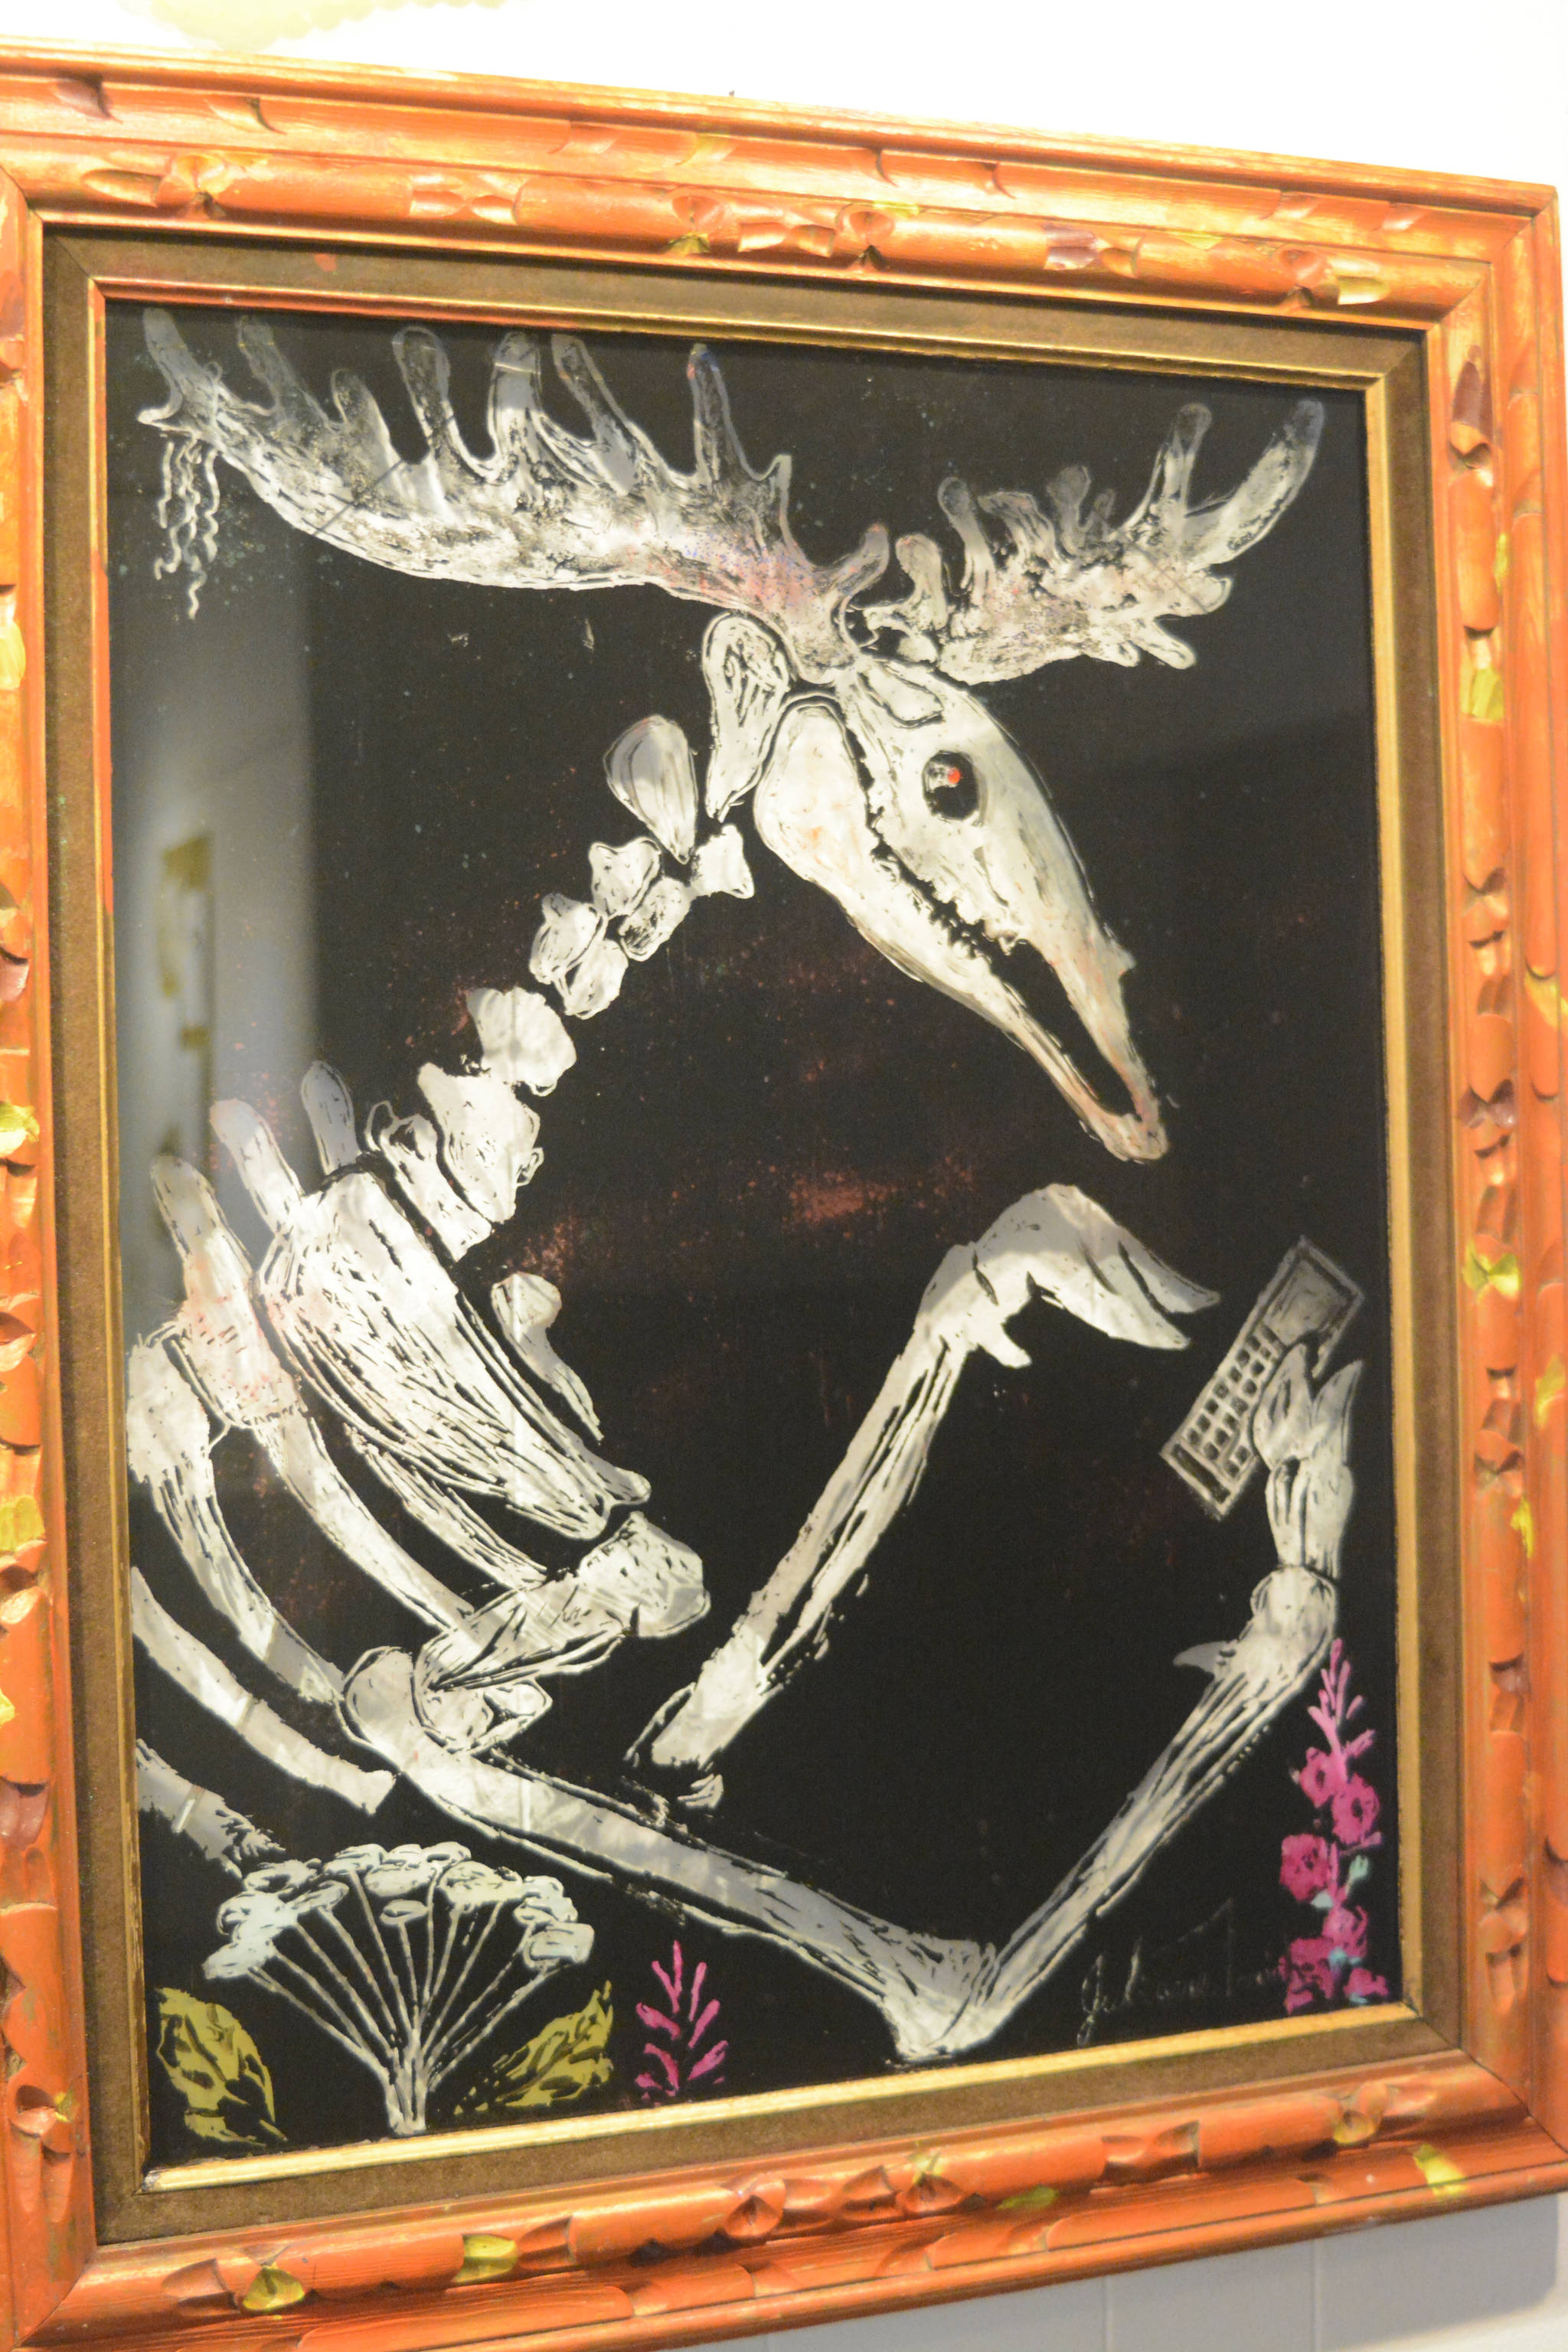 Julianne Tomich’s “De la morte Moose,” or “Day of the Dead Moose.” (Photo by Michael Armstrong, Homer News)